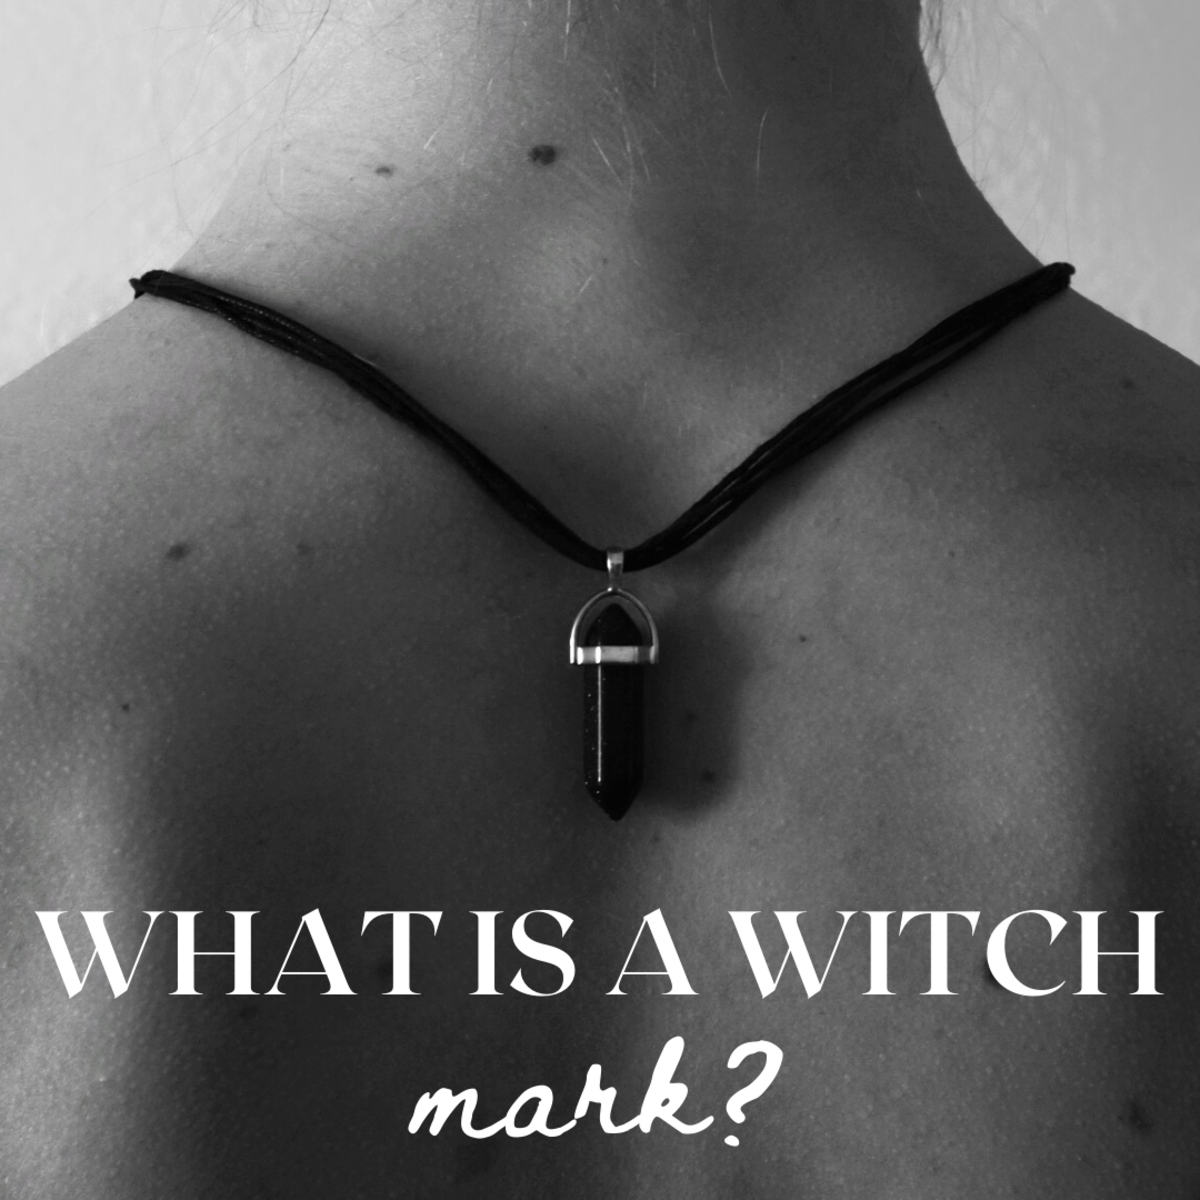 What is a witch mark?